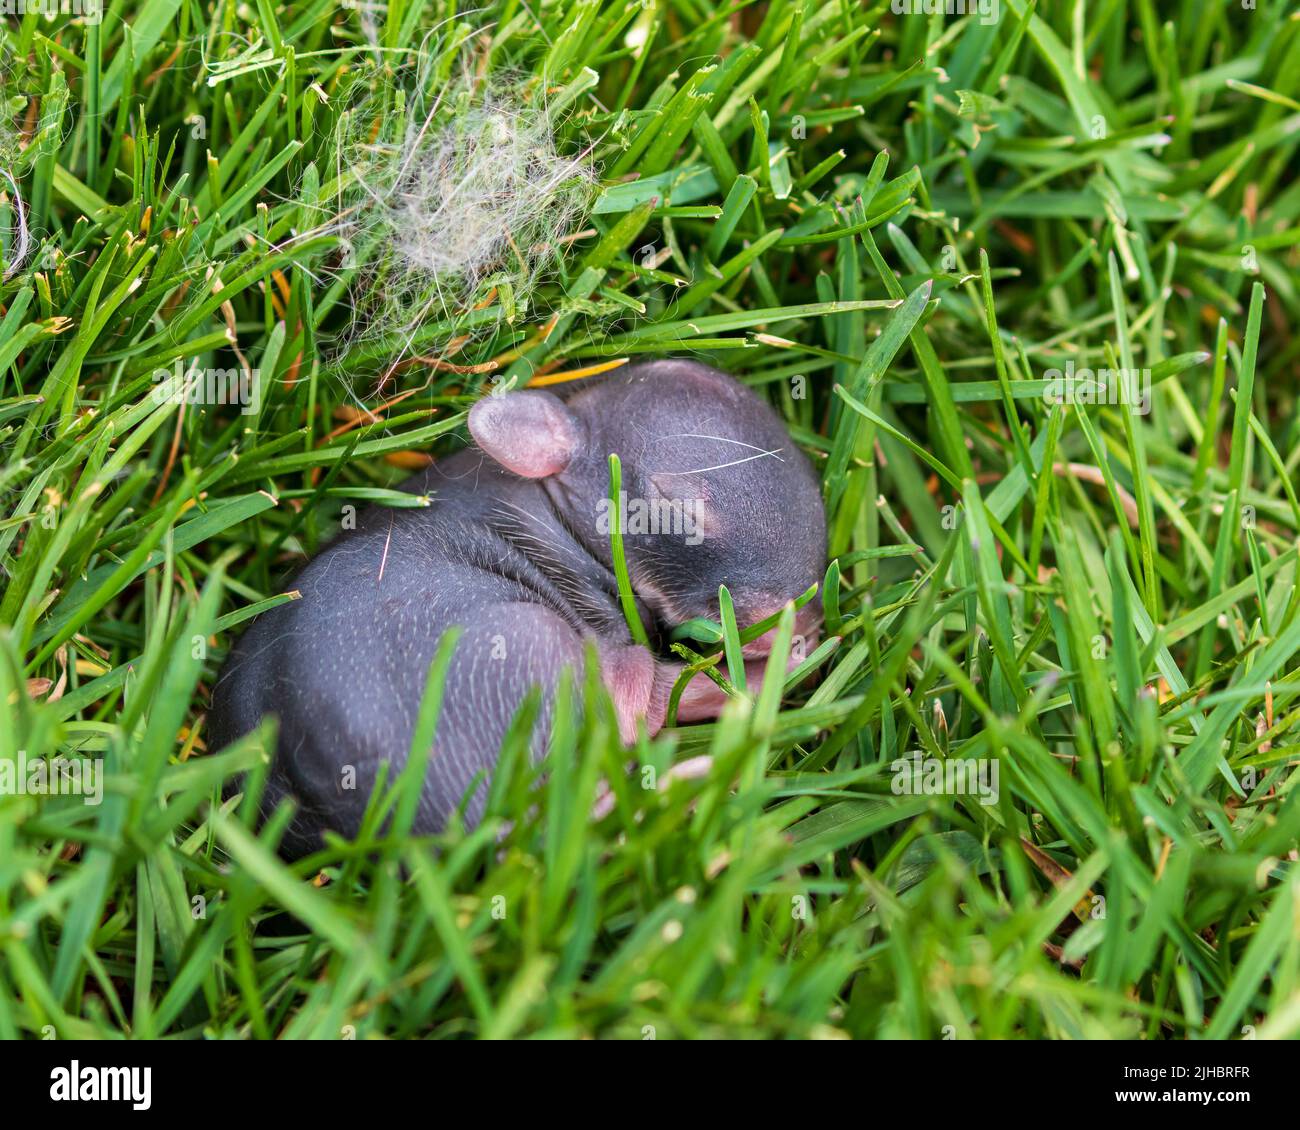 Baby cottontail rabbit in backyard lawn.  Wildlife, animals, and habitat conservation concept Stock Photo